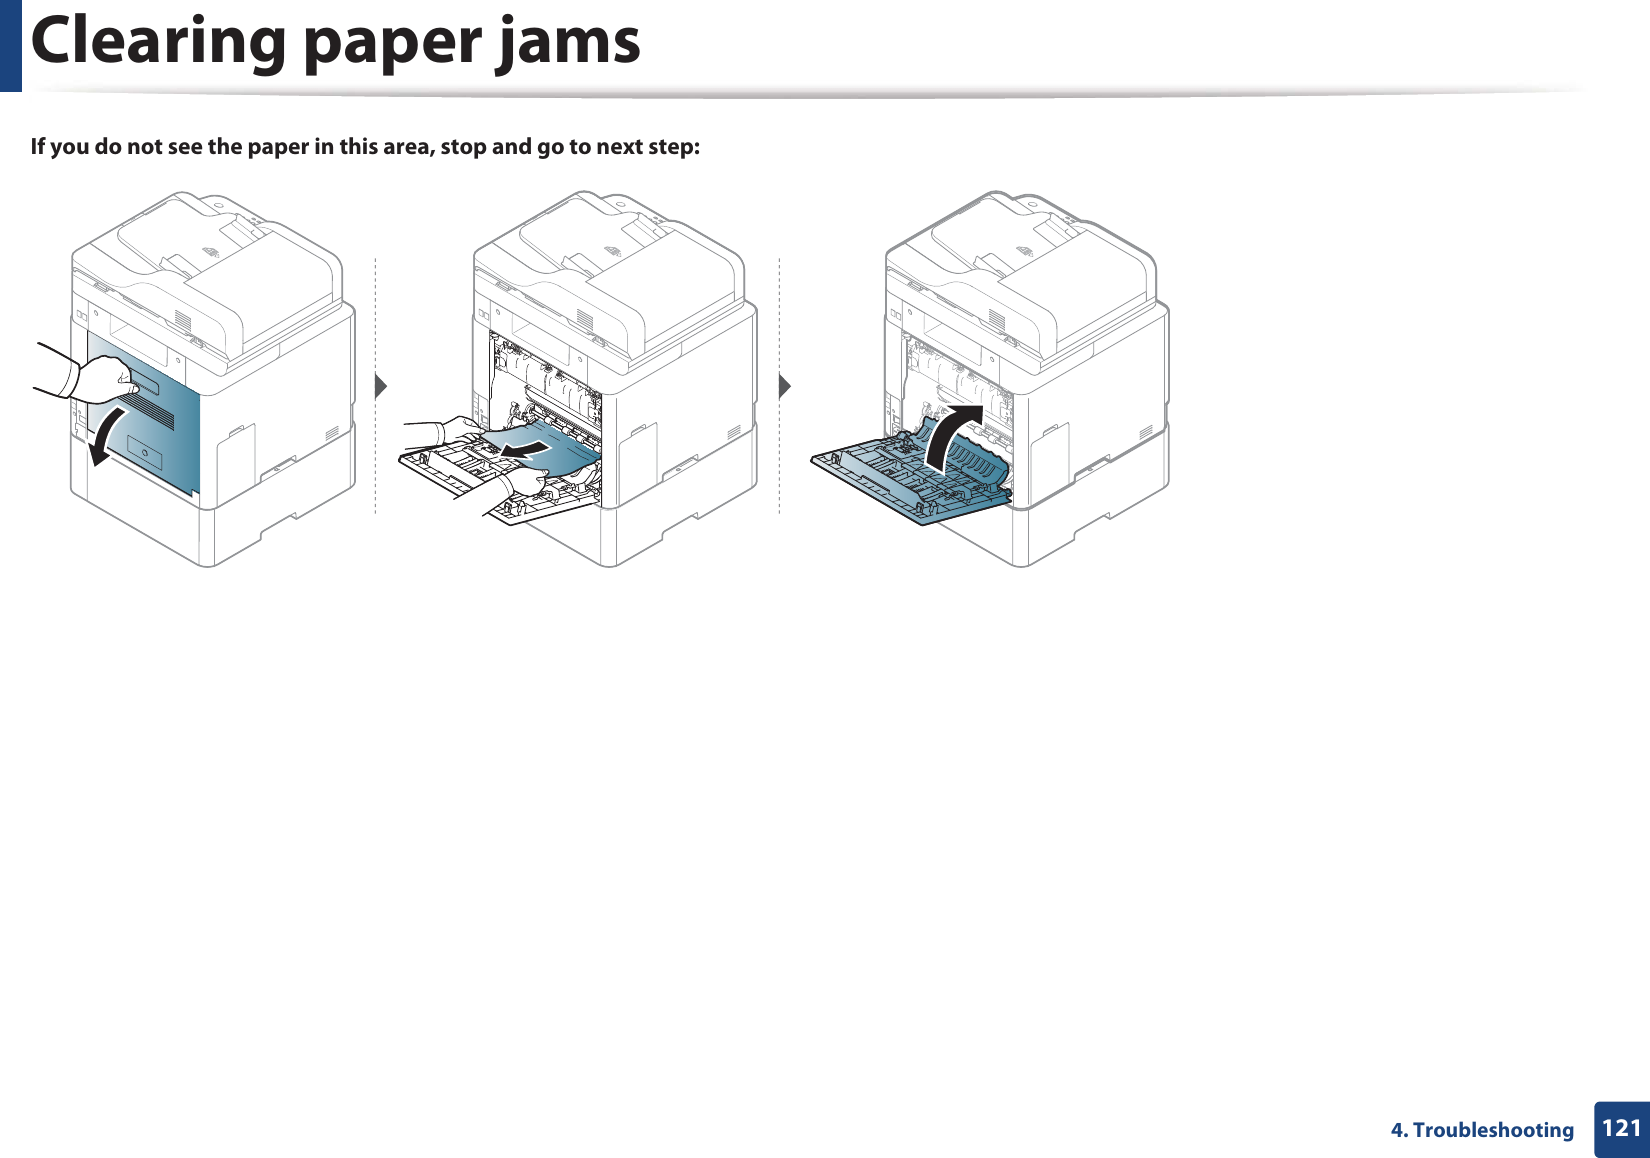 Clearing paper jams1214. TroubleshootingIf you do not see the paper in this area, stop and go to next step: